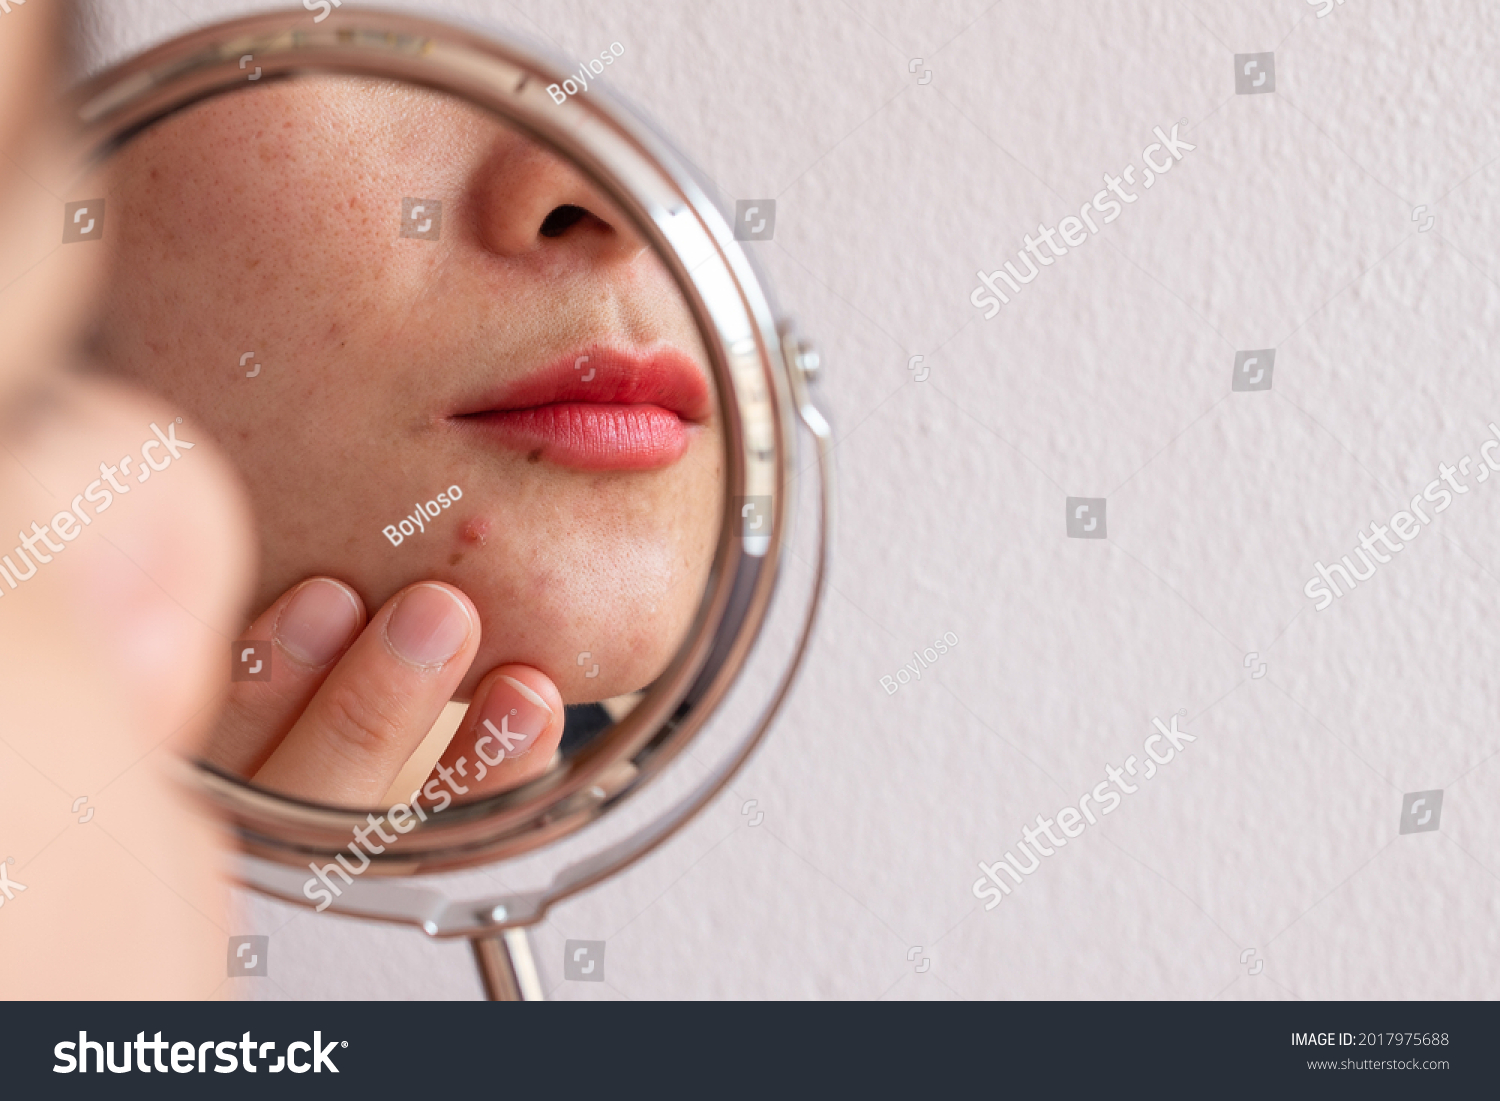 Cropped shot of woman worry about her face when she saw the problem of acne occur on her chin by a mini mirror. Conceptual shot of Acne and problem skin on female face. #2017975688